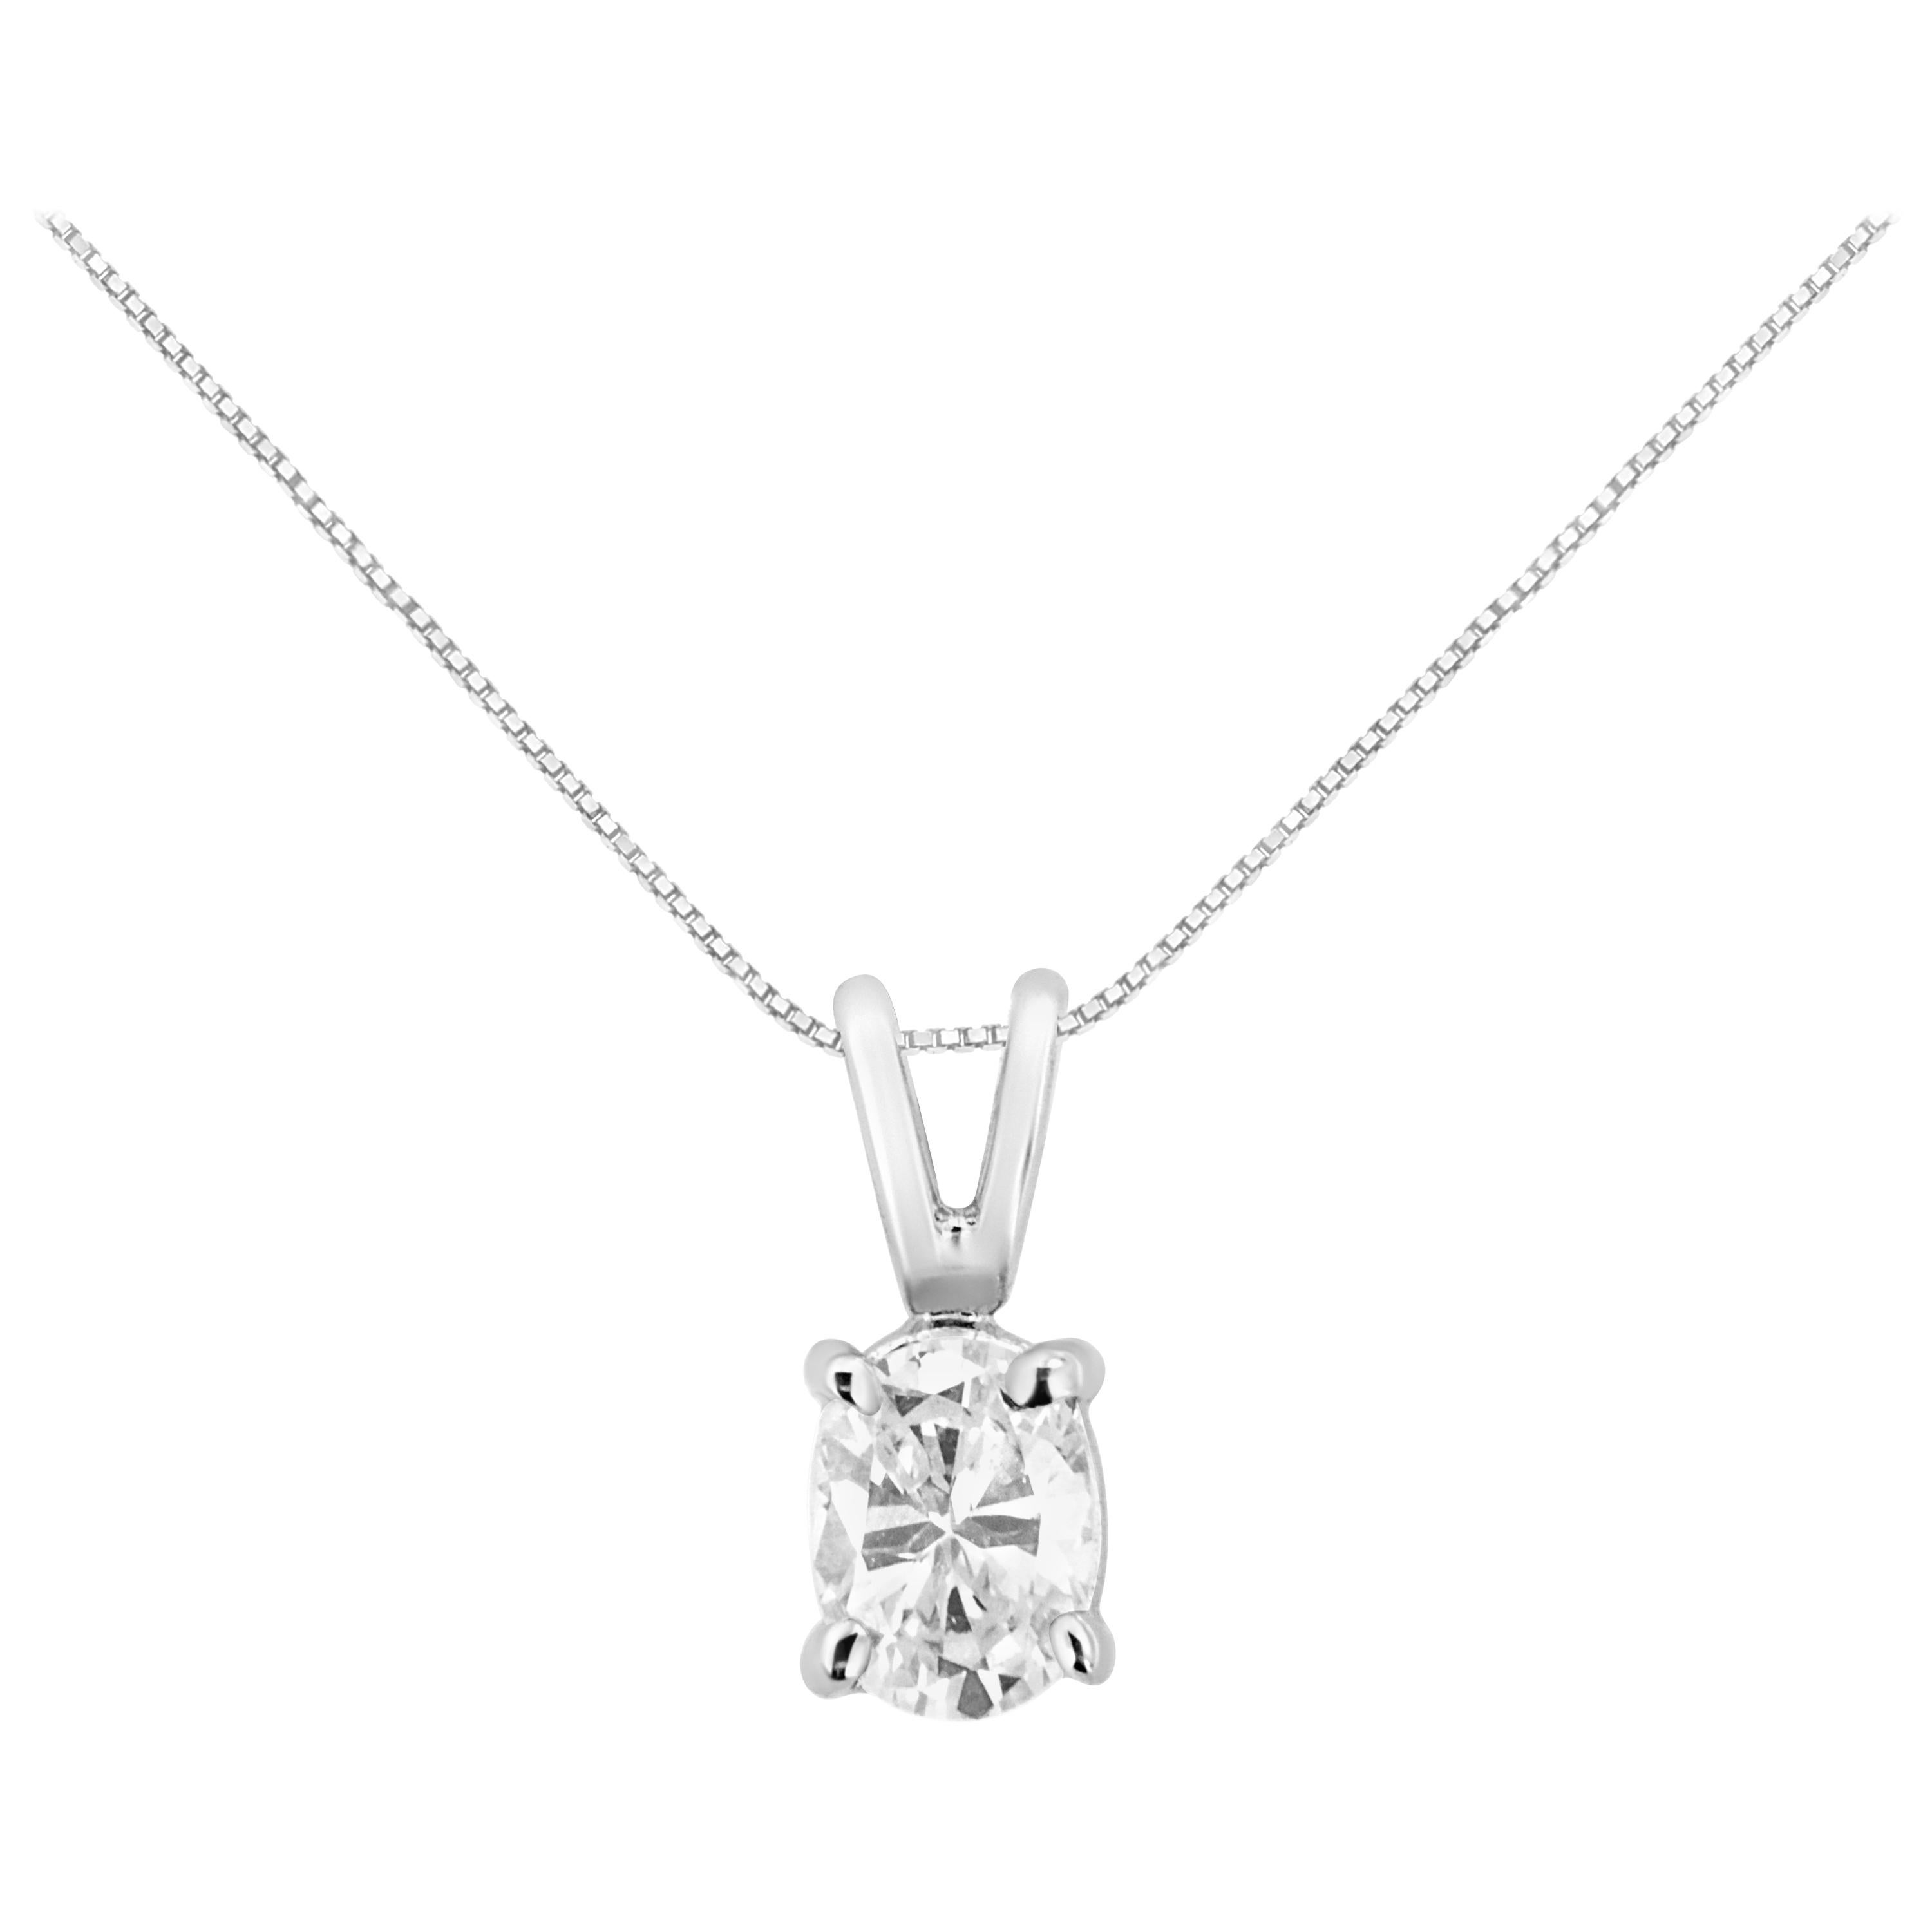 AGS Certified 14K White Gold 1/3 Carat Oval Diamond Pendant Necklace For Sale